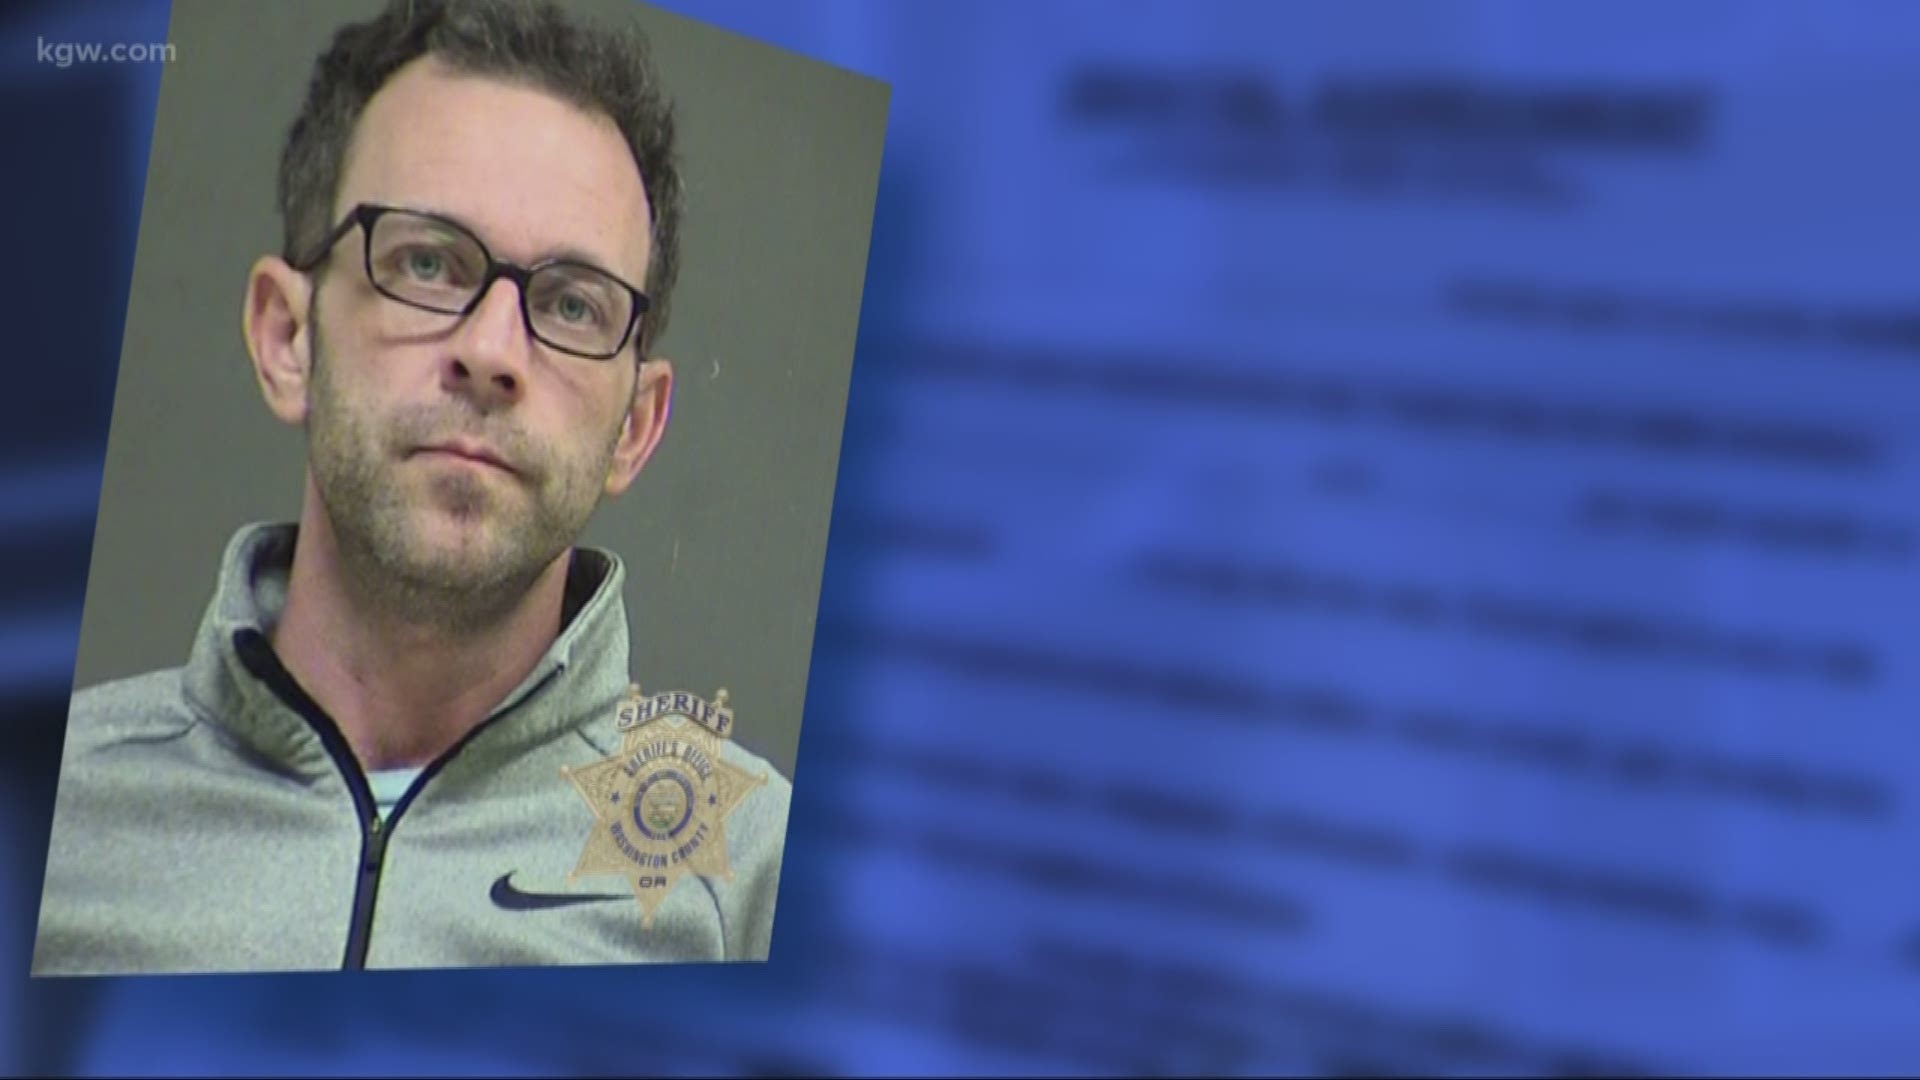 A Beaverton man was arrested for placing false ads on Craigslist advertising his mother’s Aloha home as a rental, according to the Washington County Sheriff’s Office.